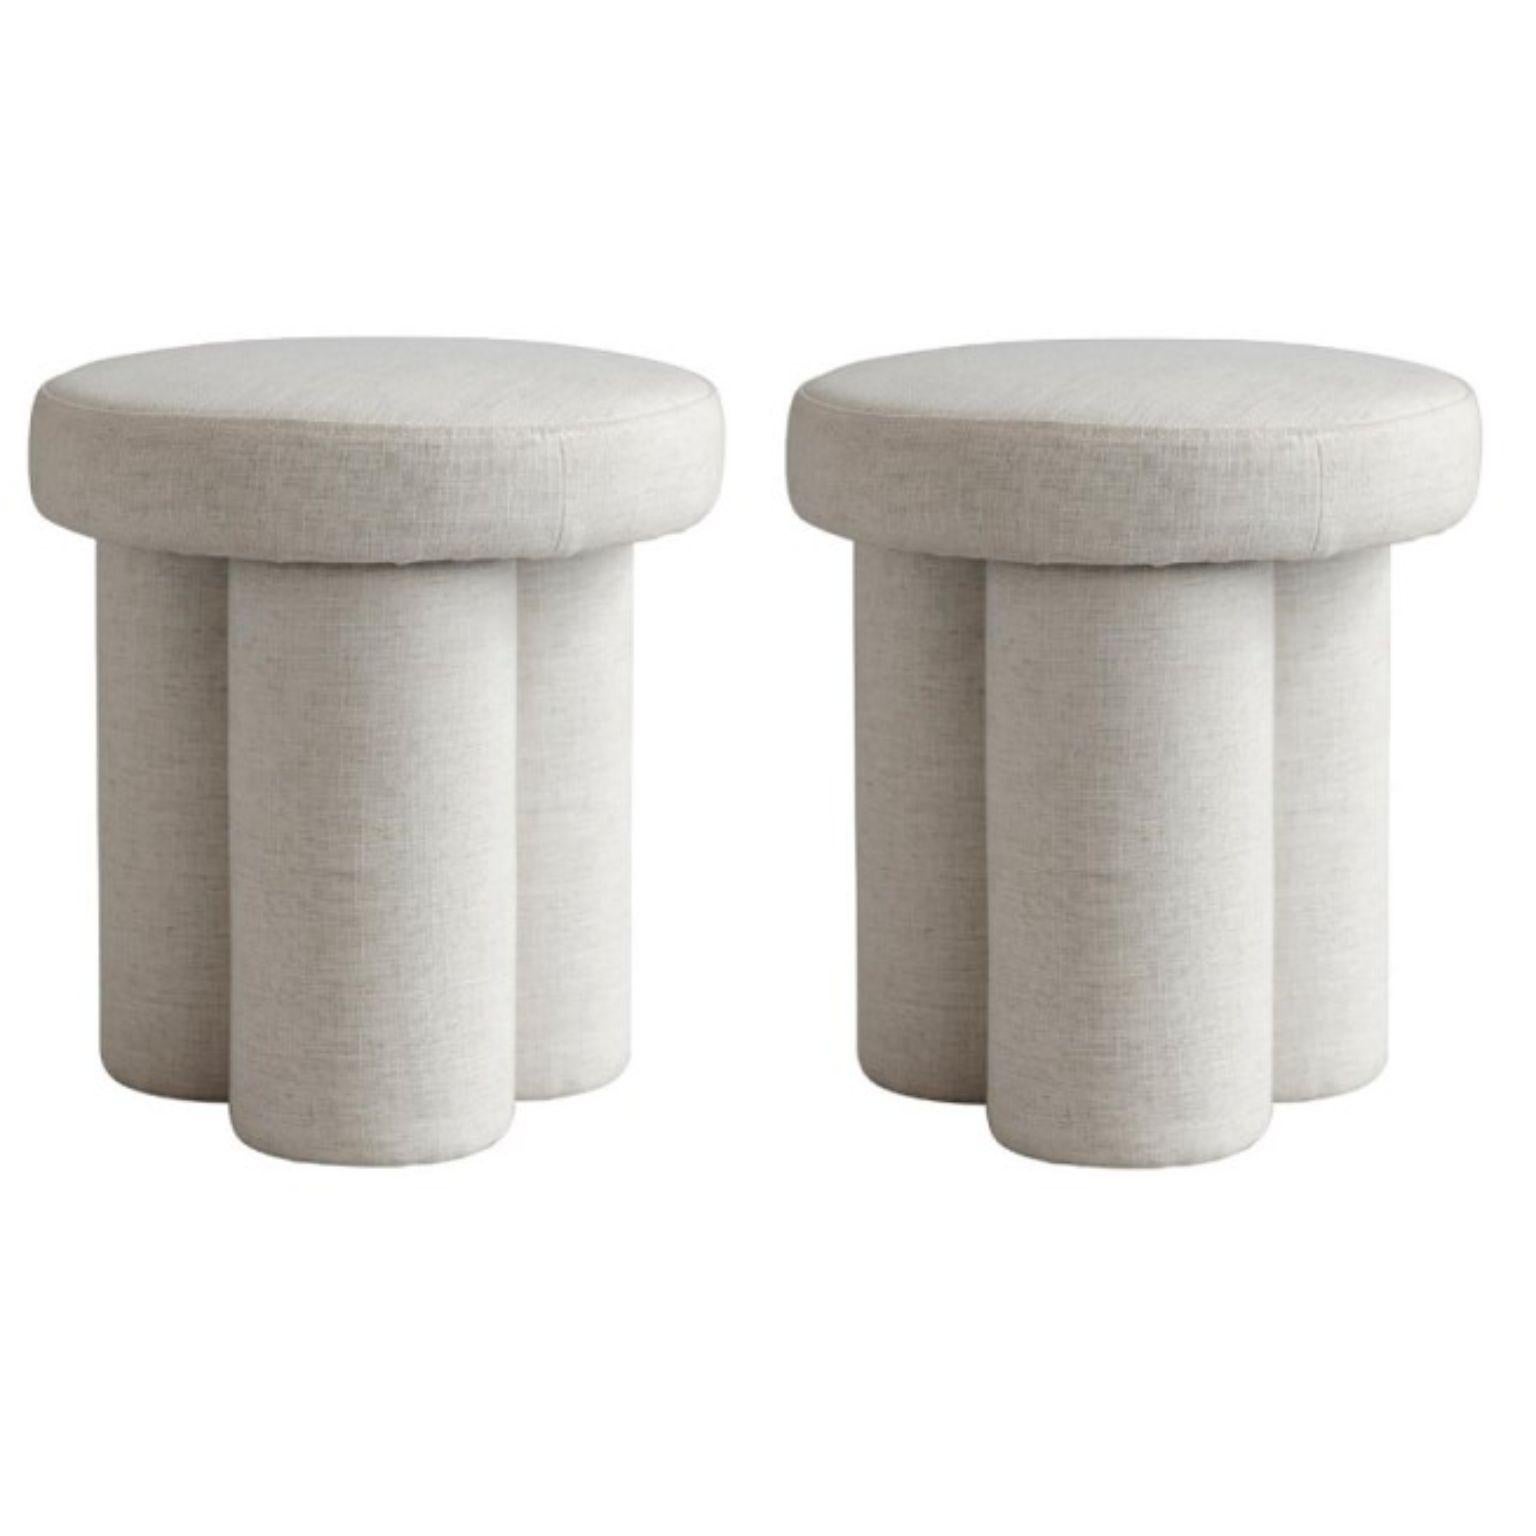 Set of 2 Linen Big Foot stools by 101 Copenhagen
Designed by Kristian Sofus Hansen & Tommy Hyldahl
Dimensions: L38 / W38 /H43 CM
Materials: Linen

A quirky and contemporary addition to any interior setting and family alike, the Big Foot Stool